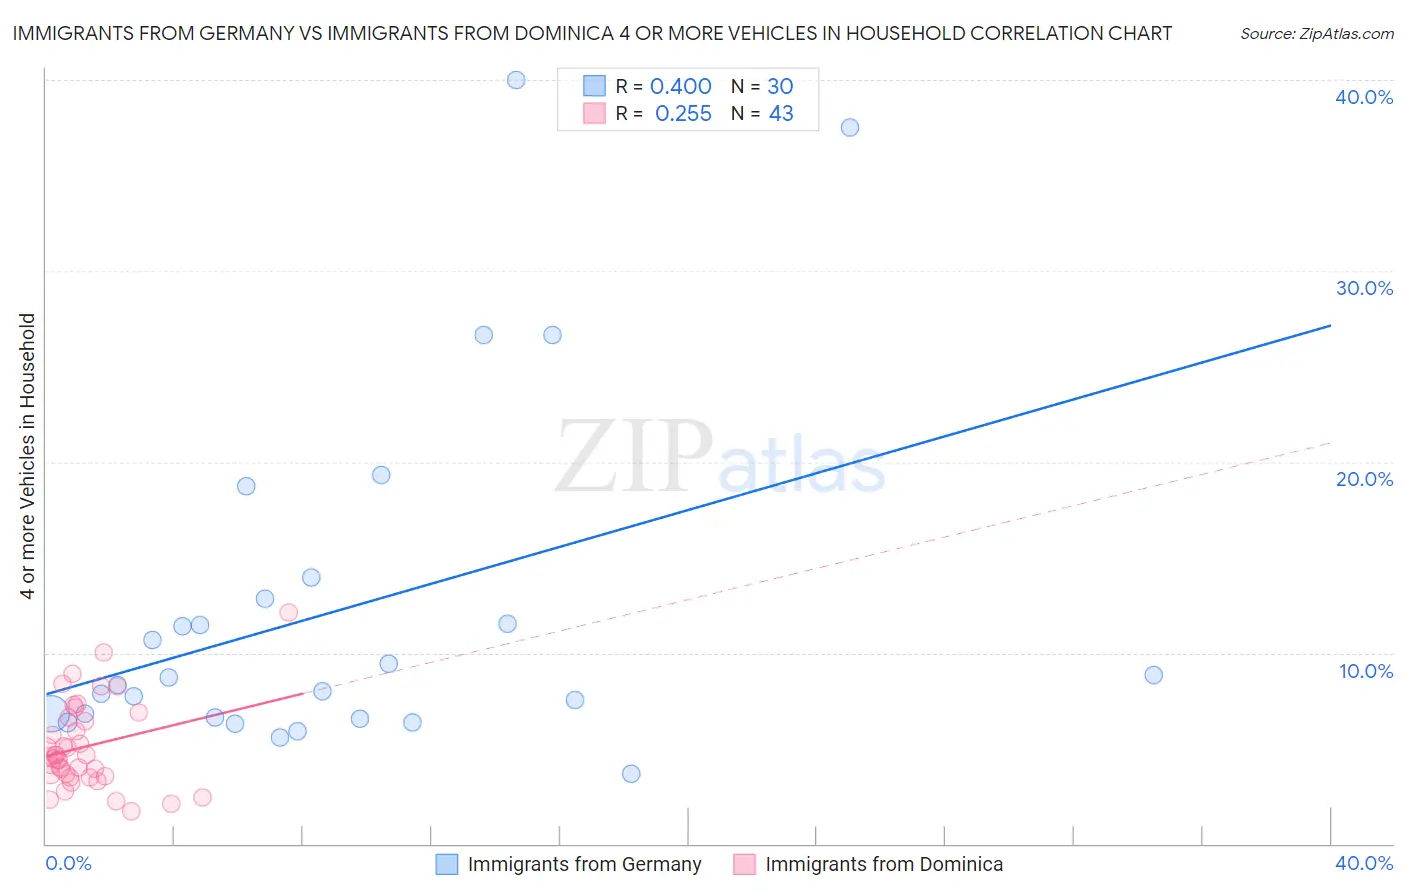 Immigrants from Germany vs Immigrants from Dominica 4 or more Vehicles in Household